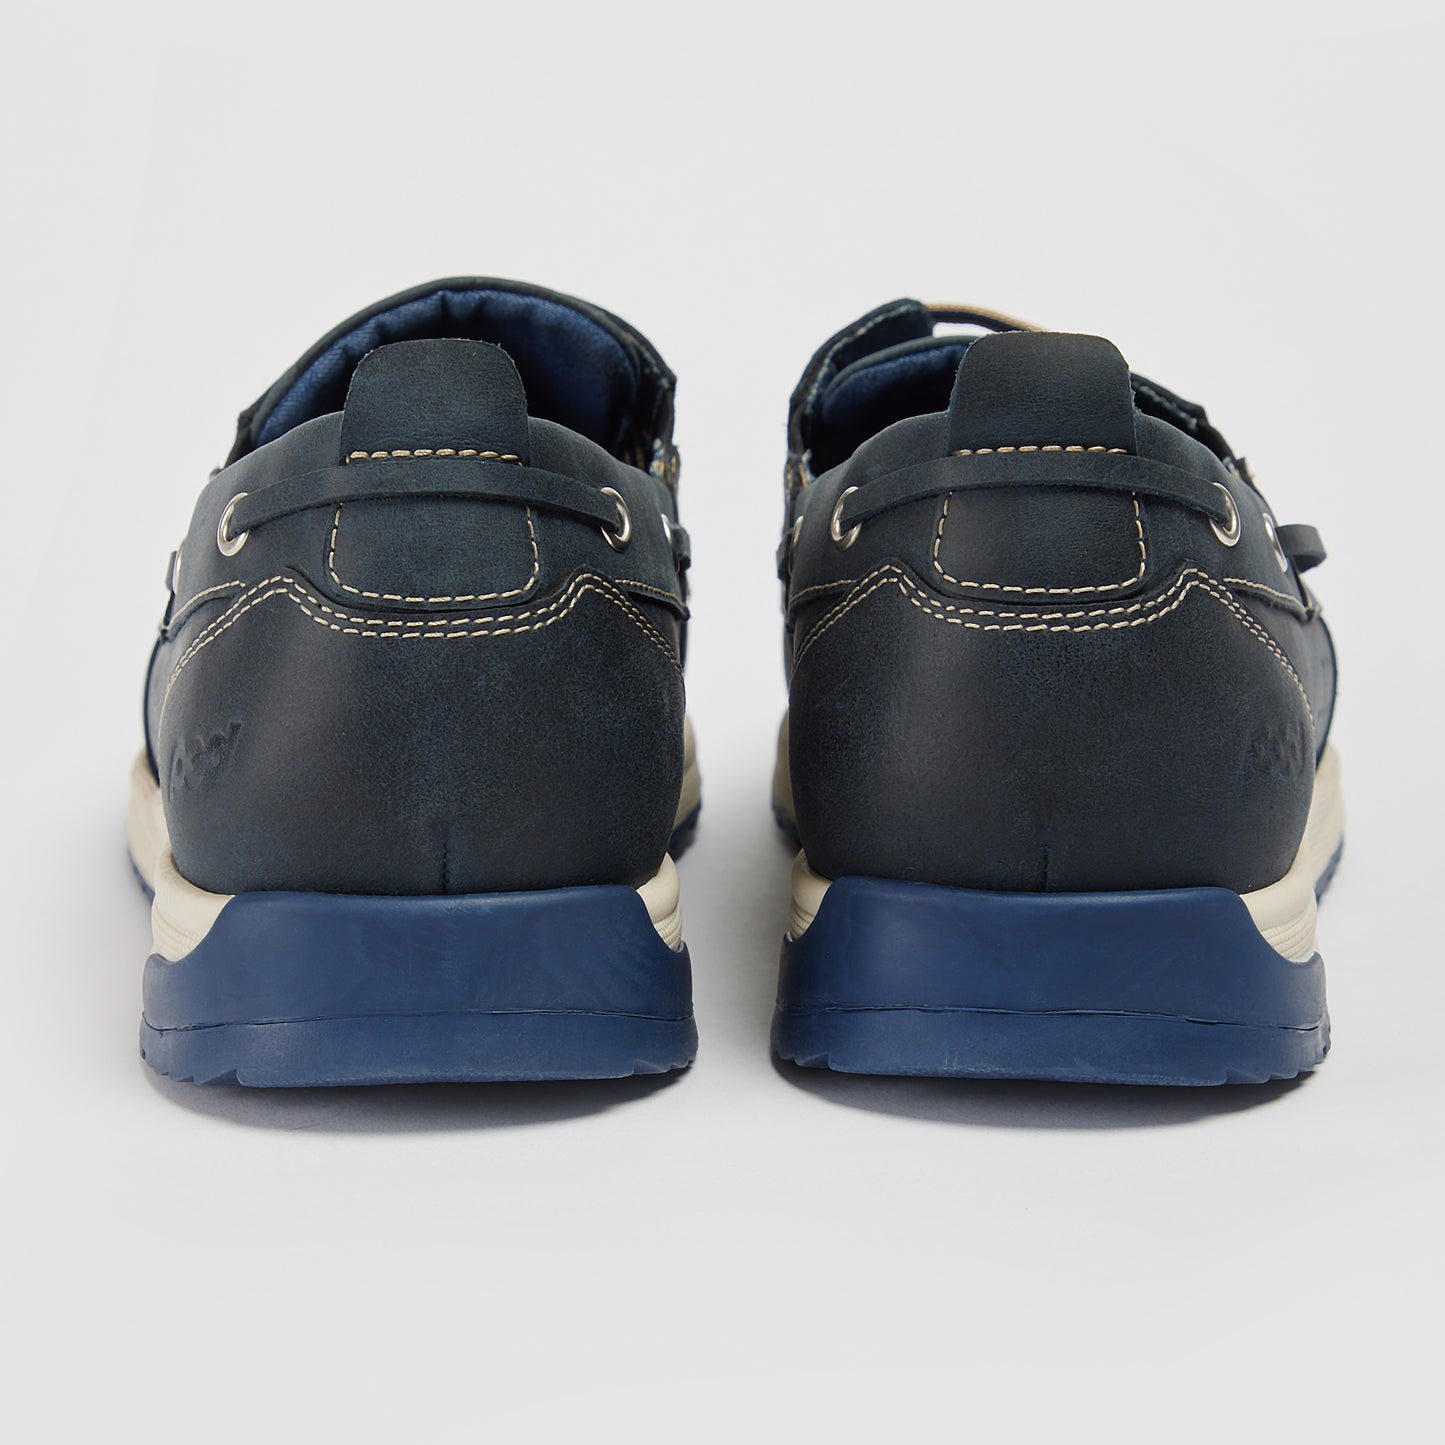 Pod Riley Navy Leather Boat Shoes